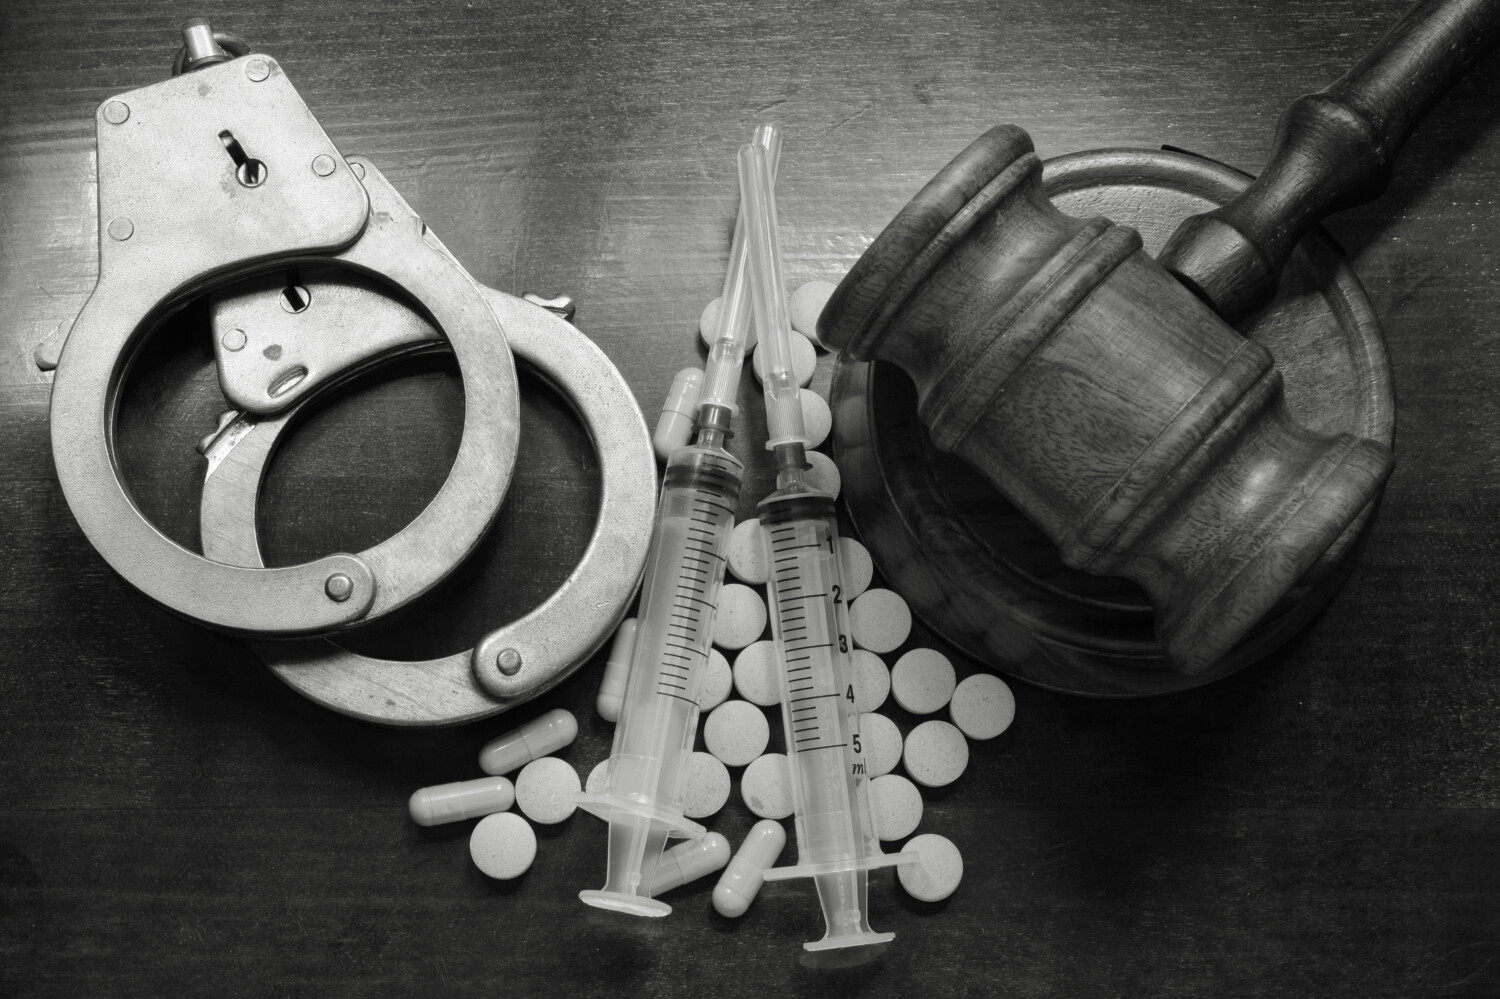 stock-photo-judge-s-gavel-with-handcuffs-drugs-and-syringes-on-wooden-table-drugs-concept-302620112